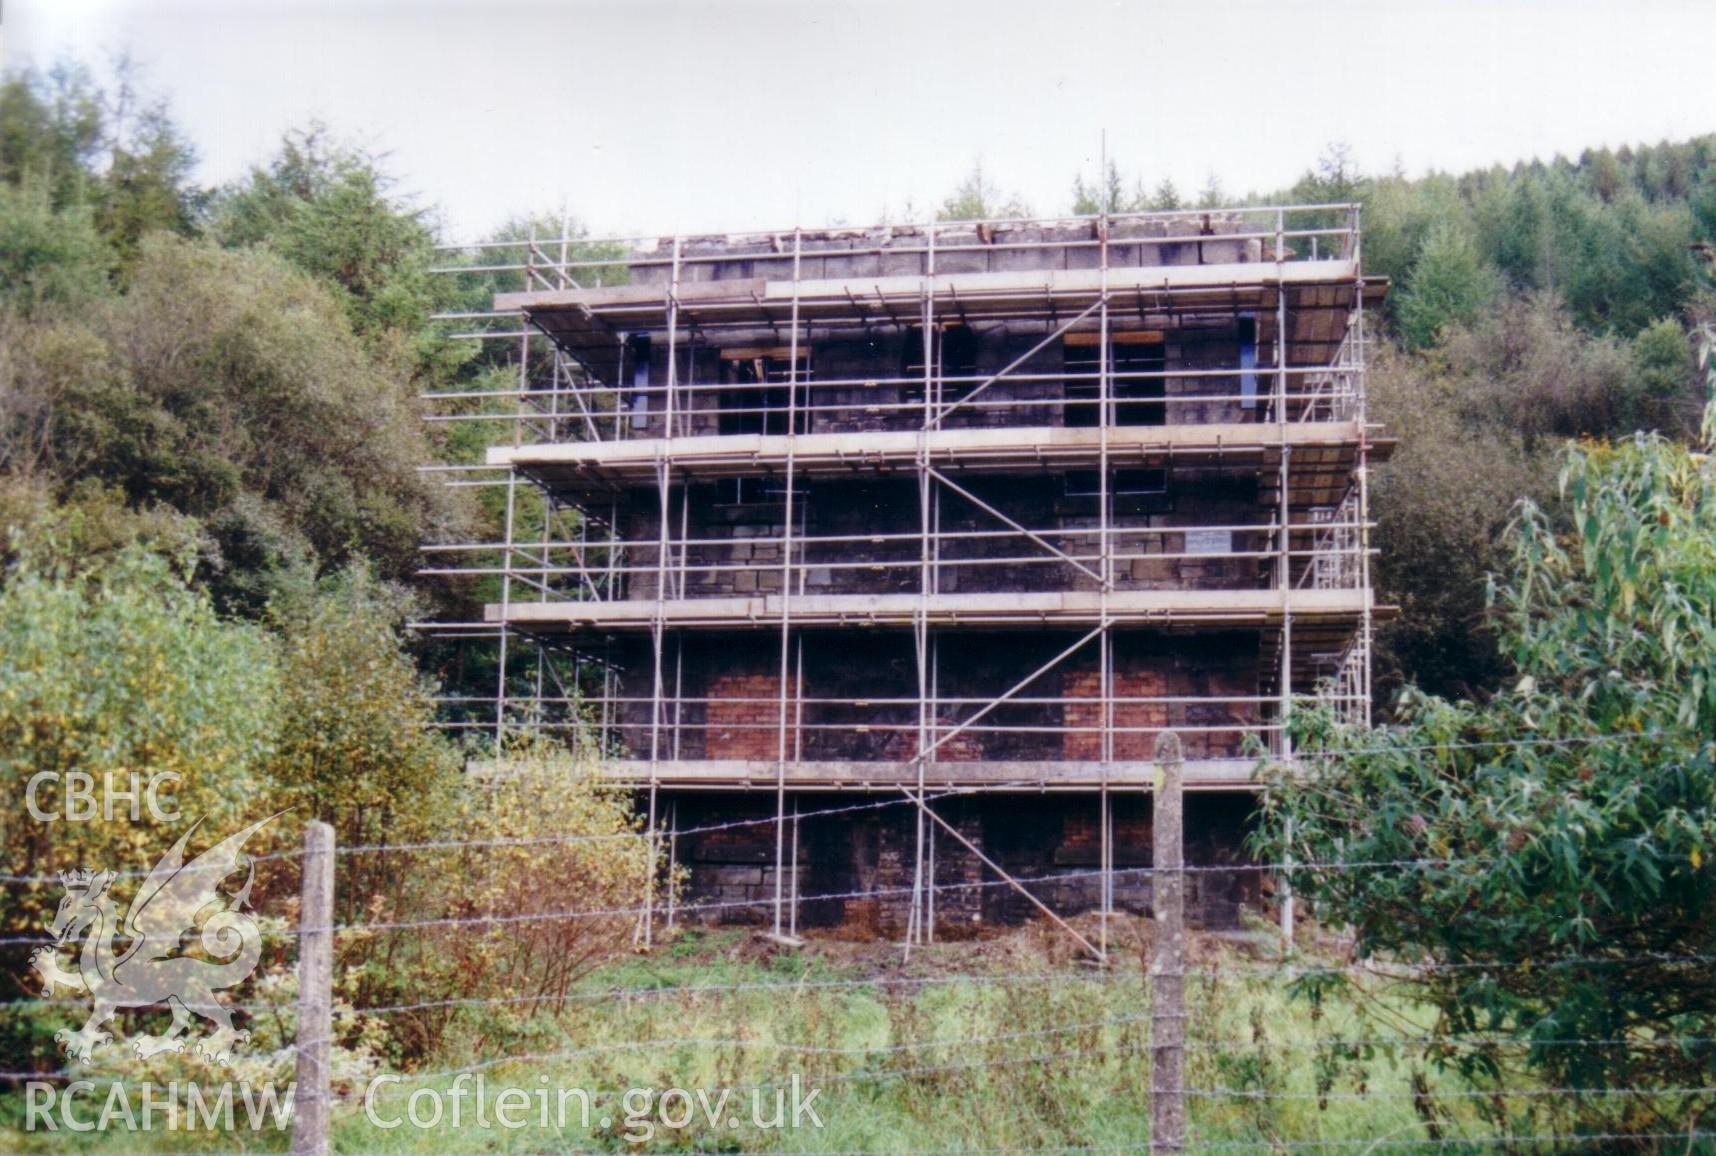 Vertical engine house, shrouded in scaffolding.